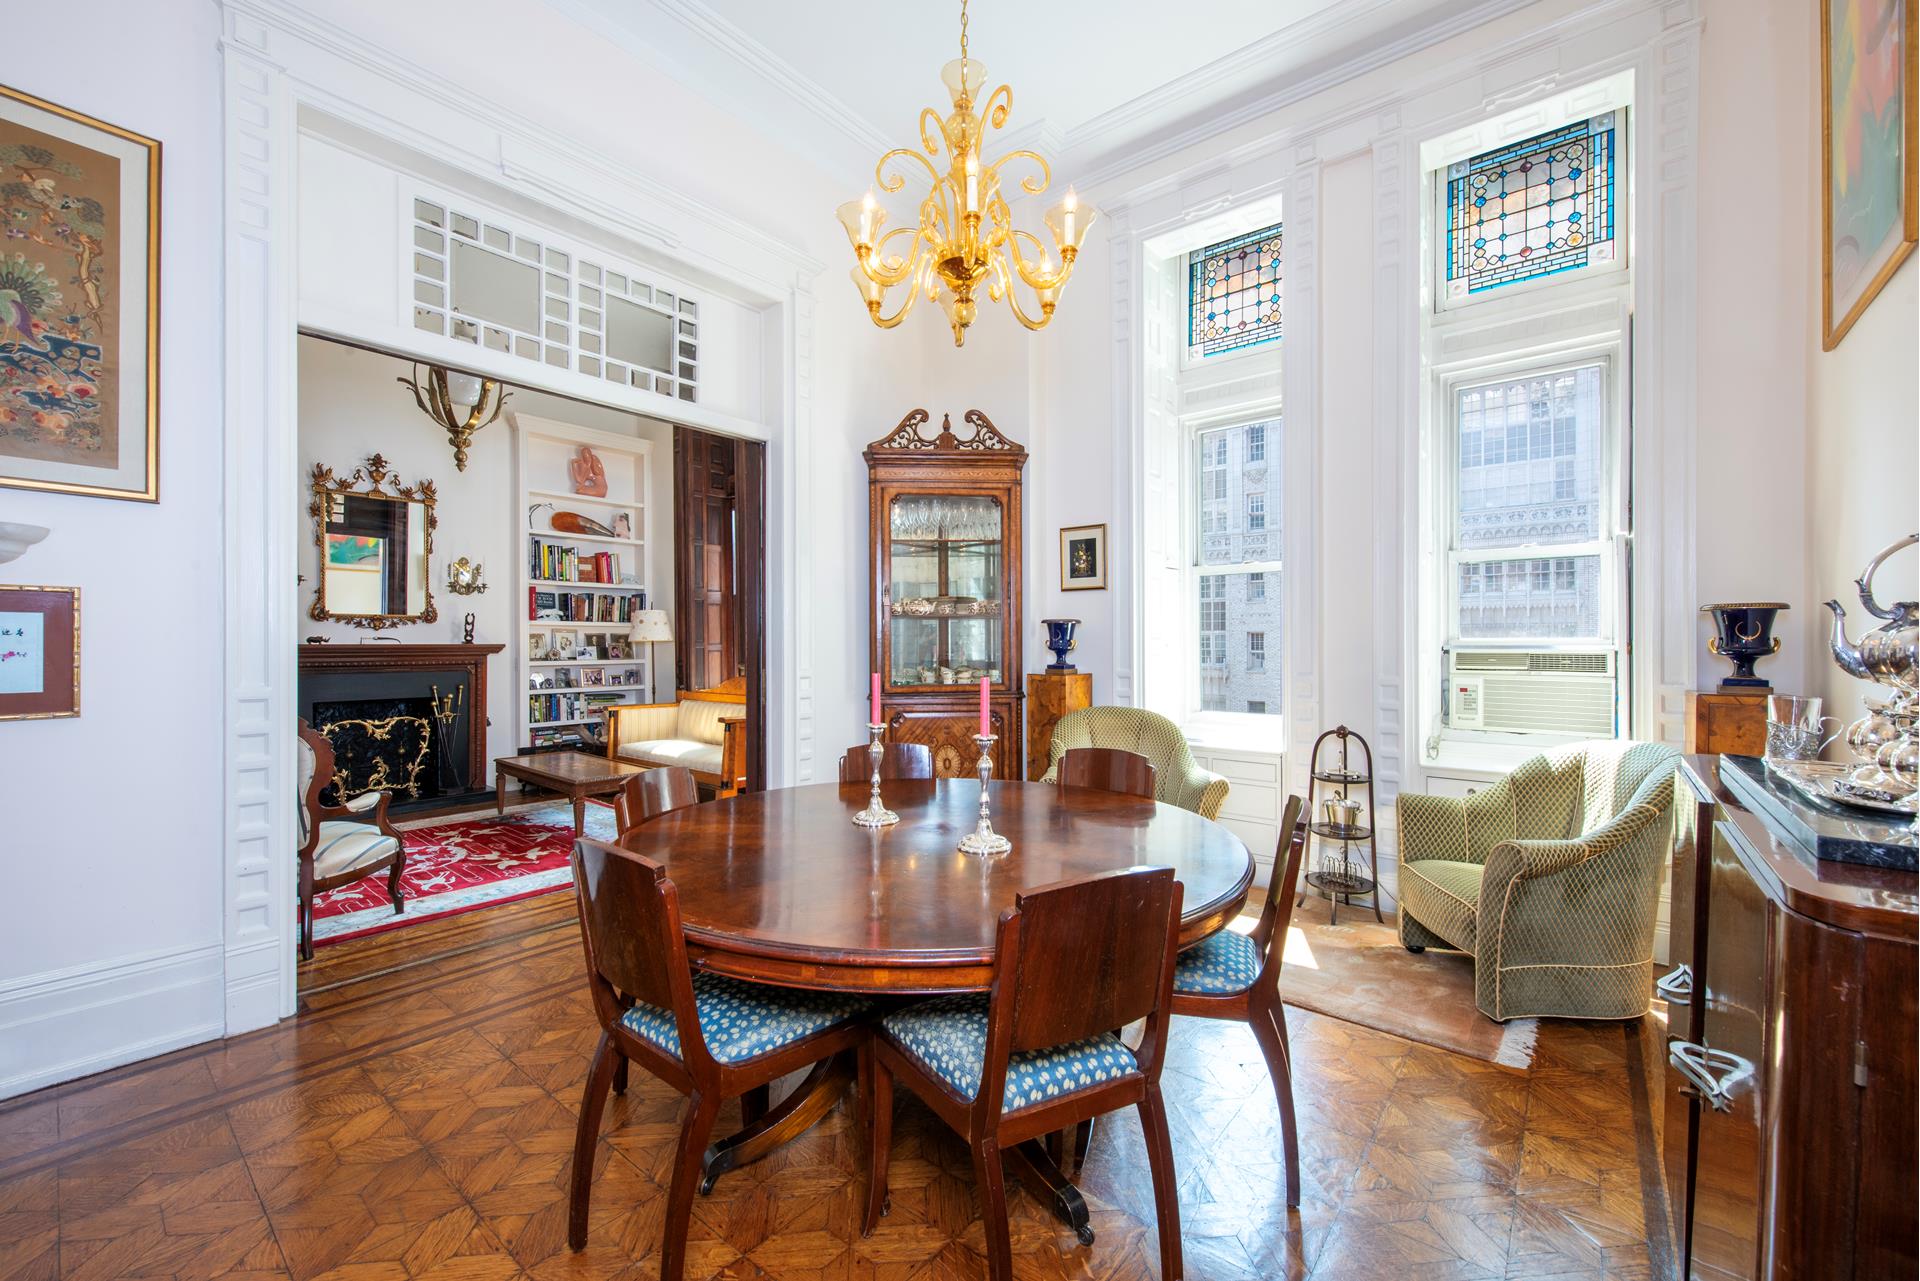 205 West 57th Street 8Ba, Central Park South, Midtown West, NYC - 3 Bedrooms  
3 Bathrooms  
7 Rooms - 